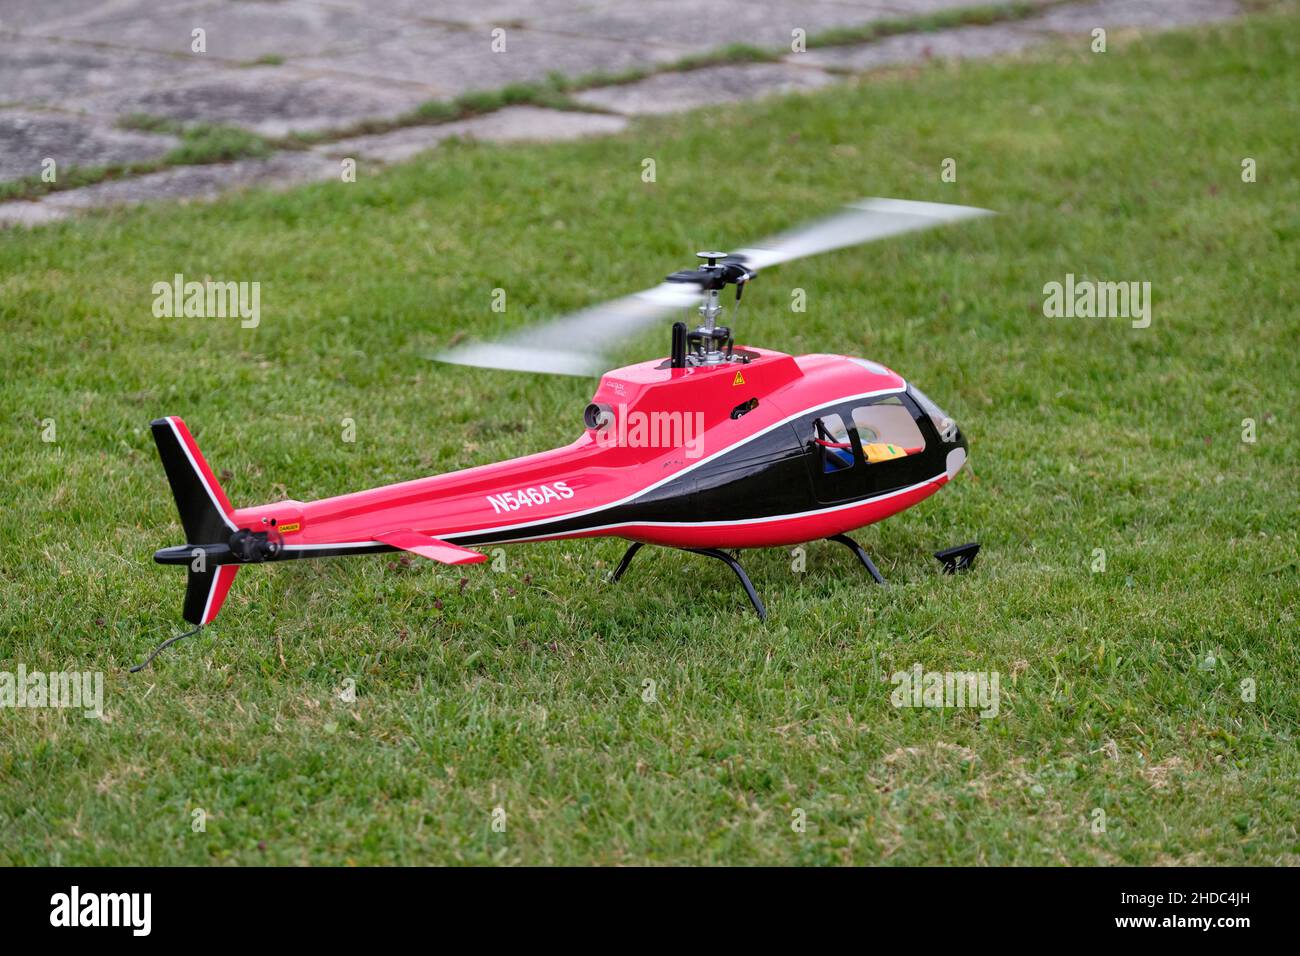 Neunhof, Germany  April 17, 2021: A radio controlled scale model of a AS350 Ecureuil helicopter is standing on a meadow in spring Stock Photo